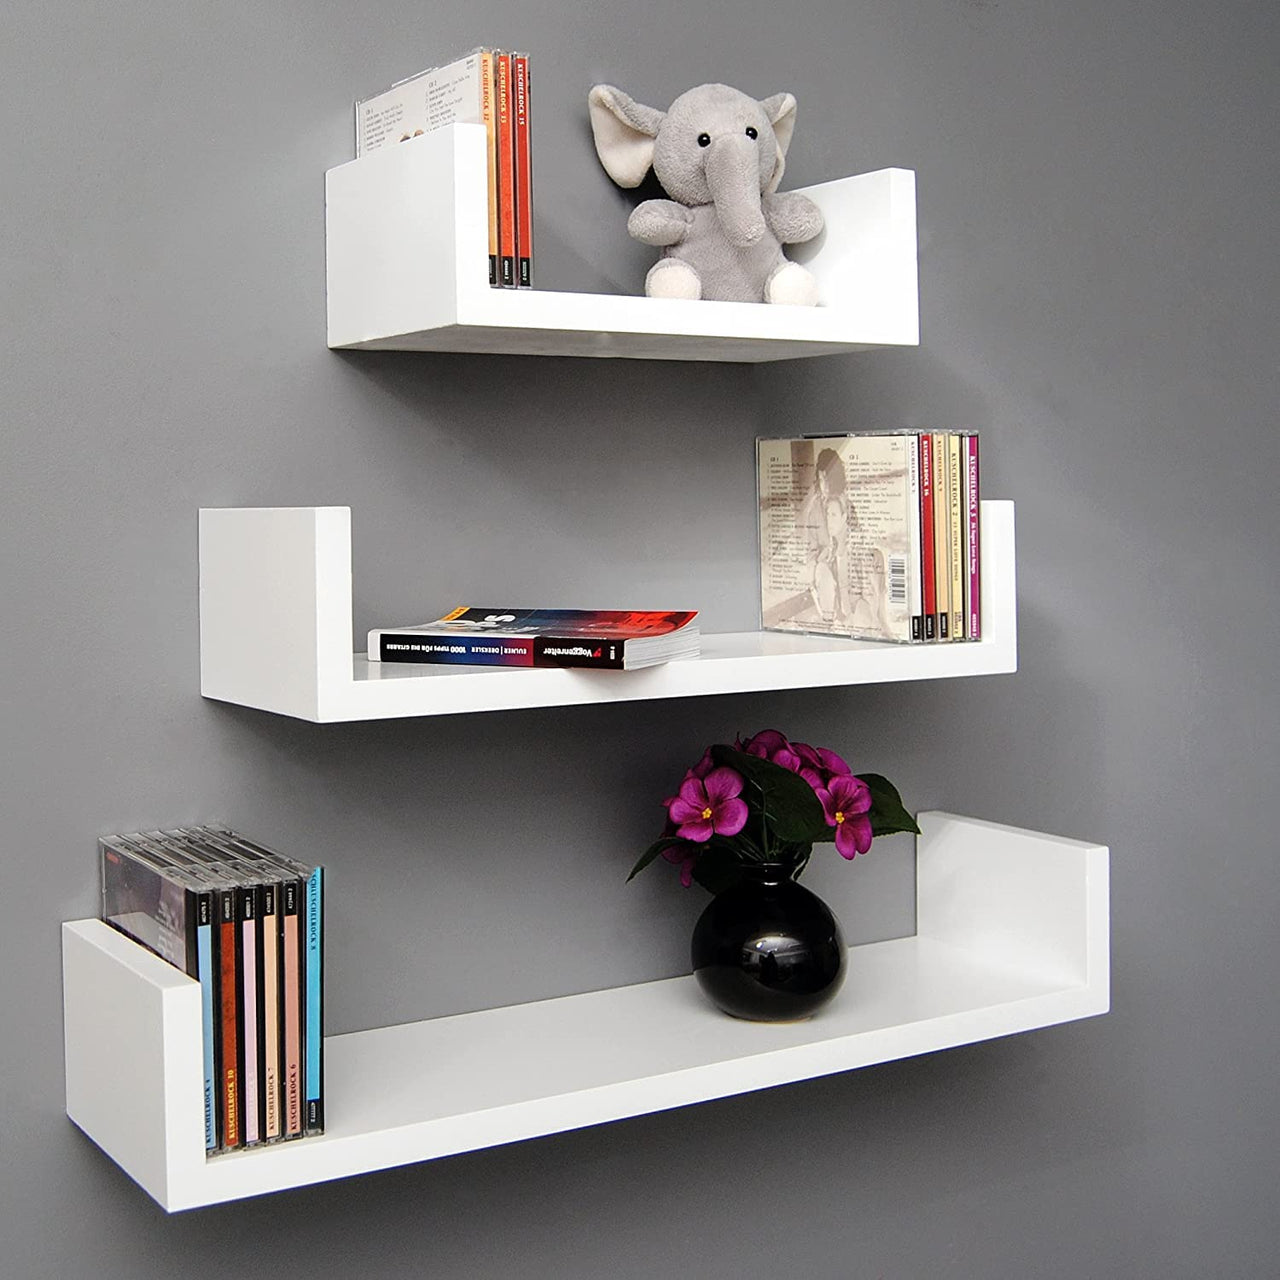 Wall Mount Wall Shelf Wall Rack Wall Shelves for Living Room/Home/Kitchen for Home Decor Dime Store